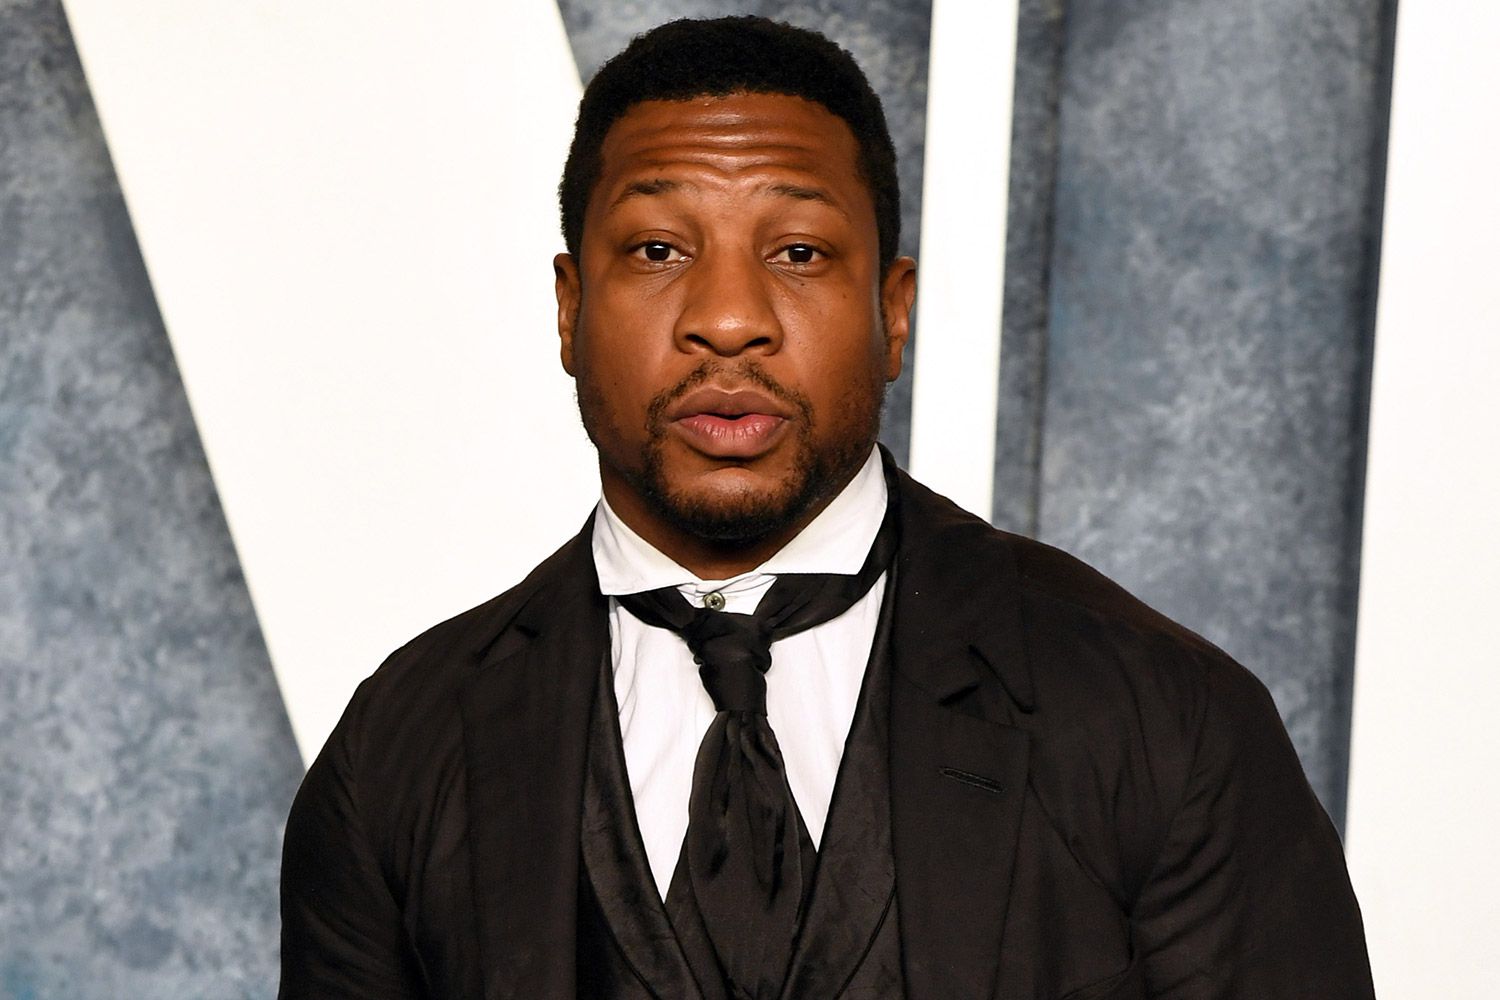 Jonathan Majors attends the 2023 Vanity Fair Oscar Party Hosted By Radhika Jones at Wallis Annenberg Center for the Performing Arts on March 12, 2023